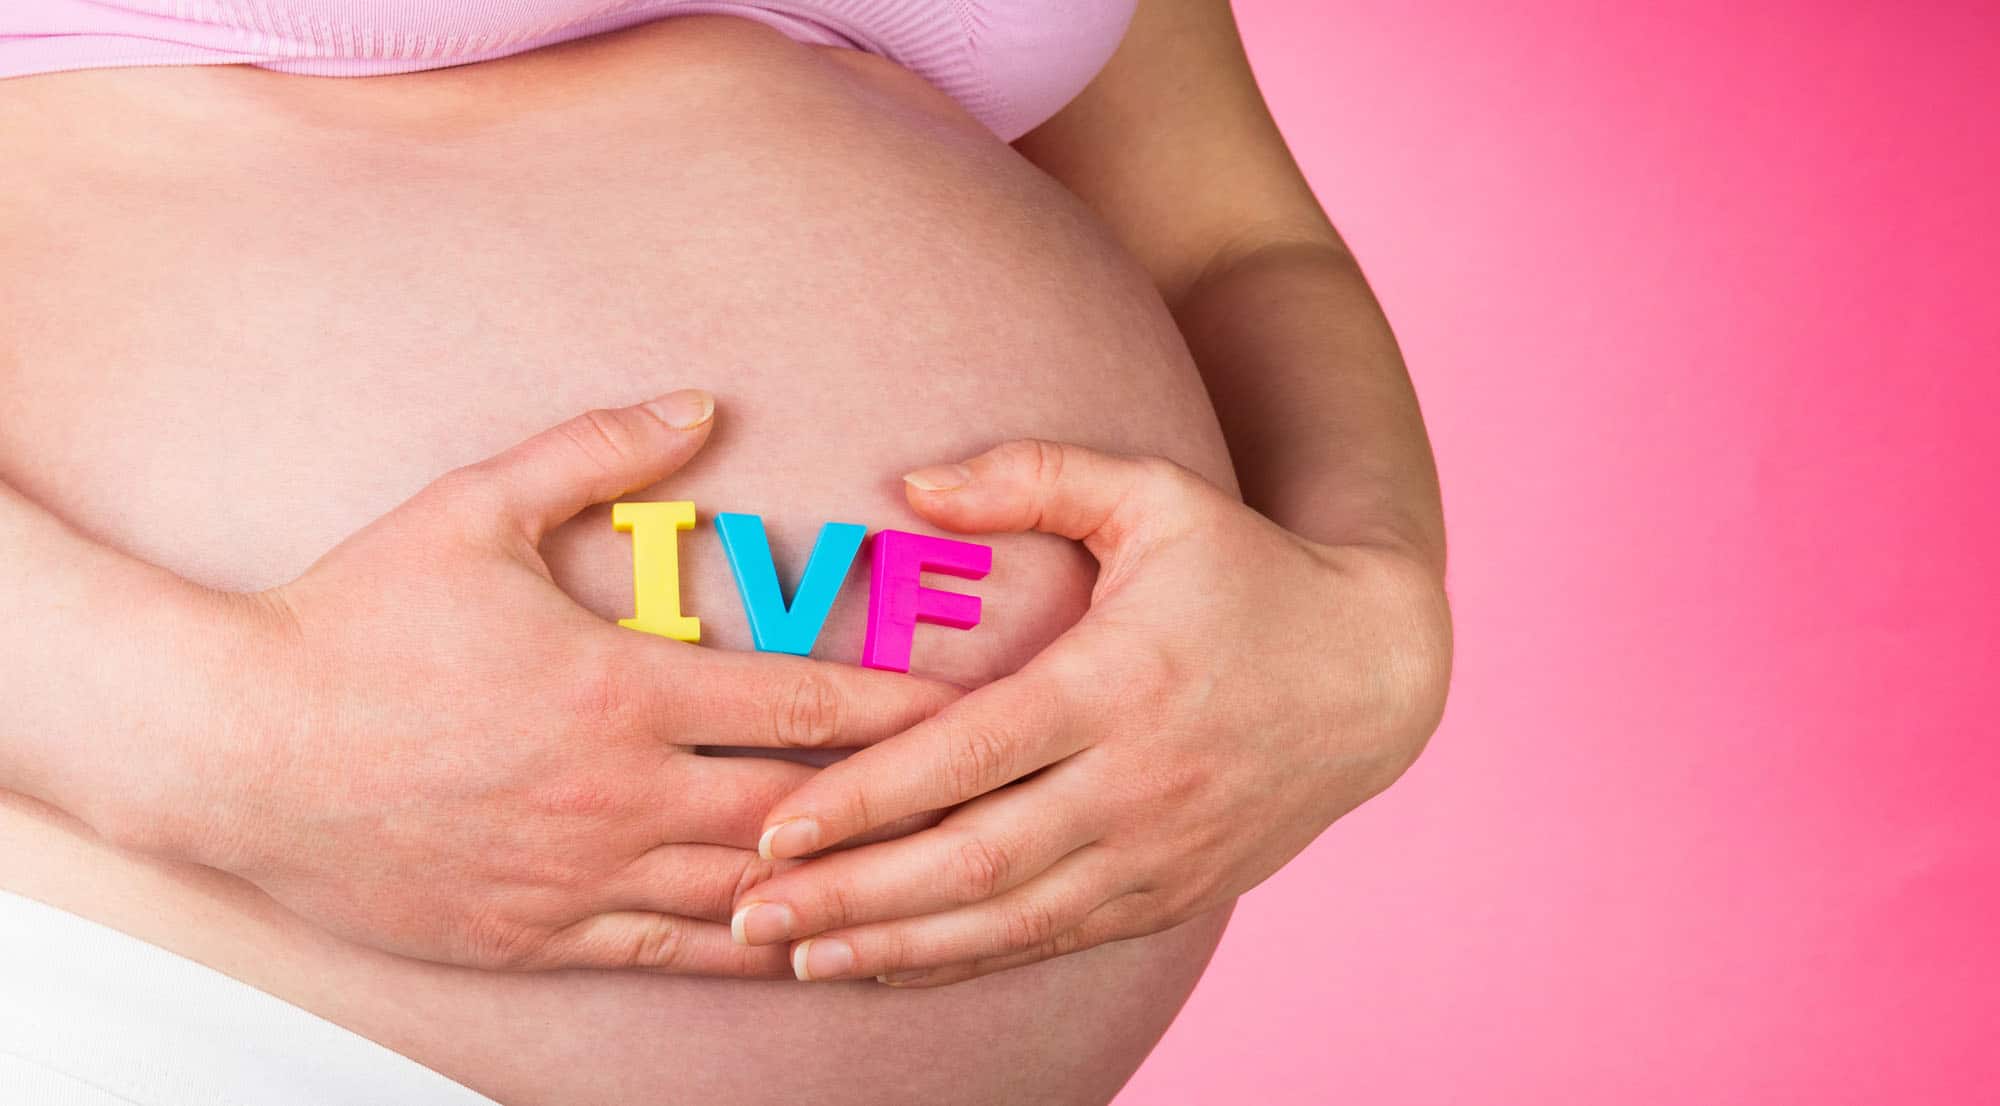 ivf - Is it possible to conceive naturally after IVF? An expert responds.